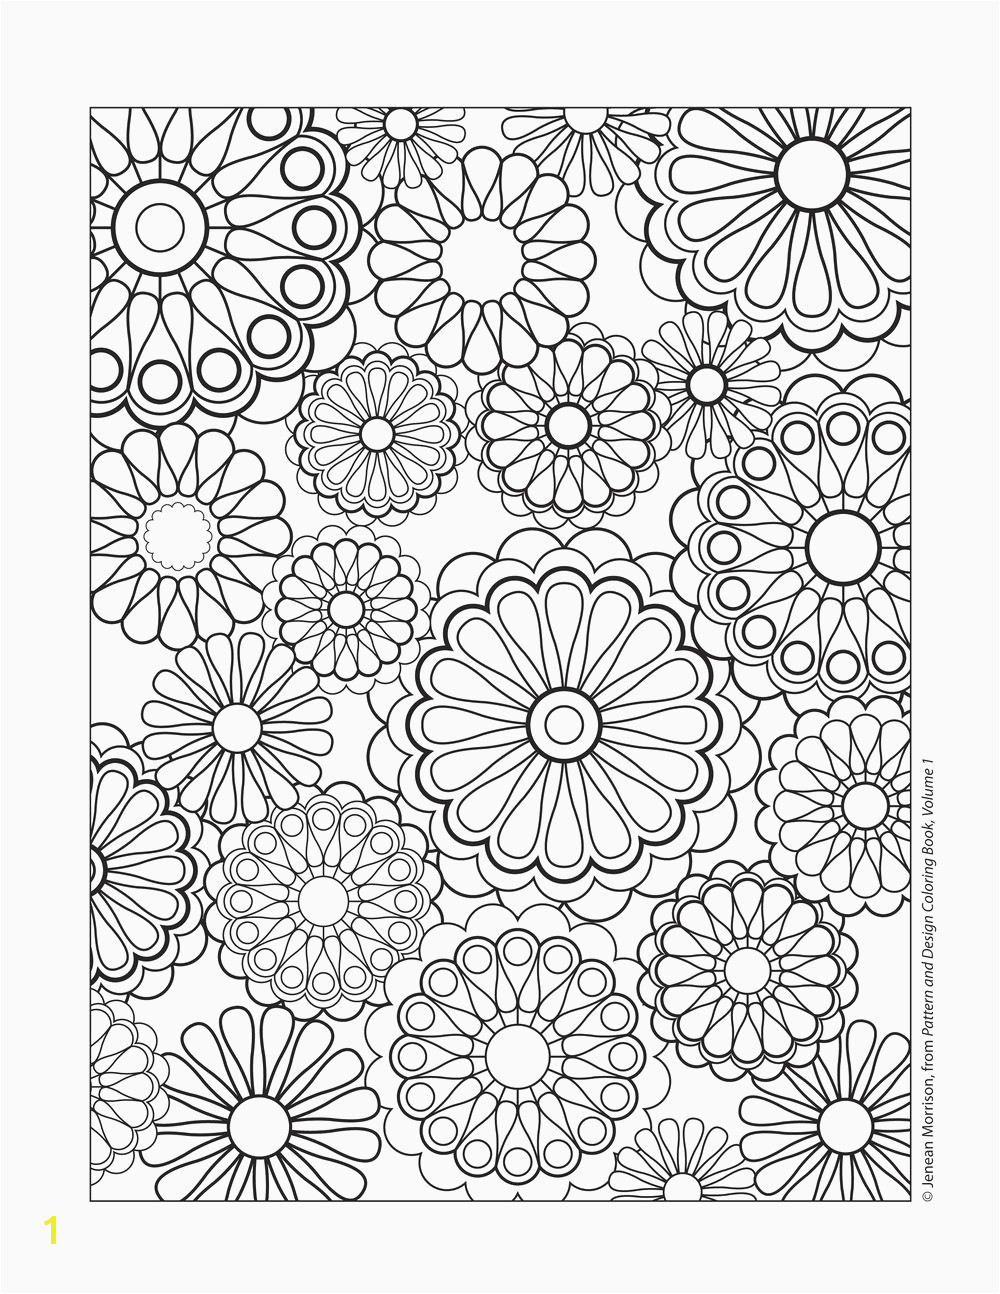 Detailed Online Coloring Pages Coloring Pages Games Lovely Coloring Book 0d Modokom – Fun Time